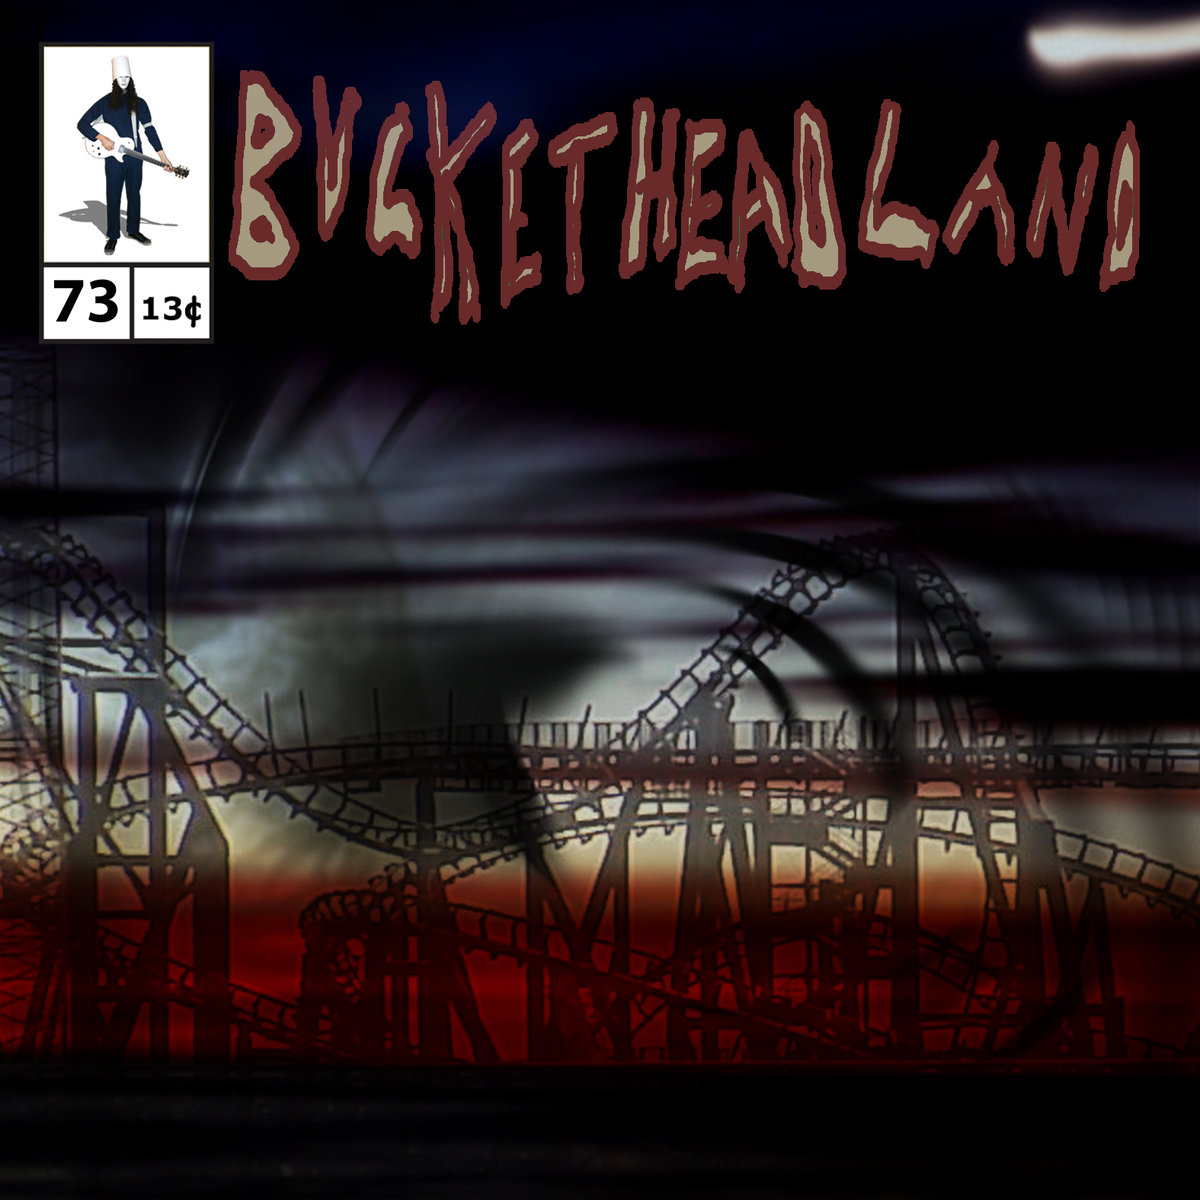 Buckethead - Pike 73: Final Bend Of The Labyrinth (2014)